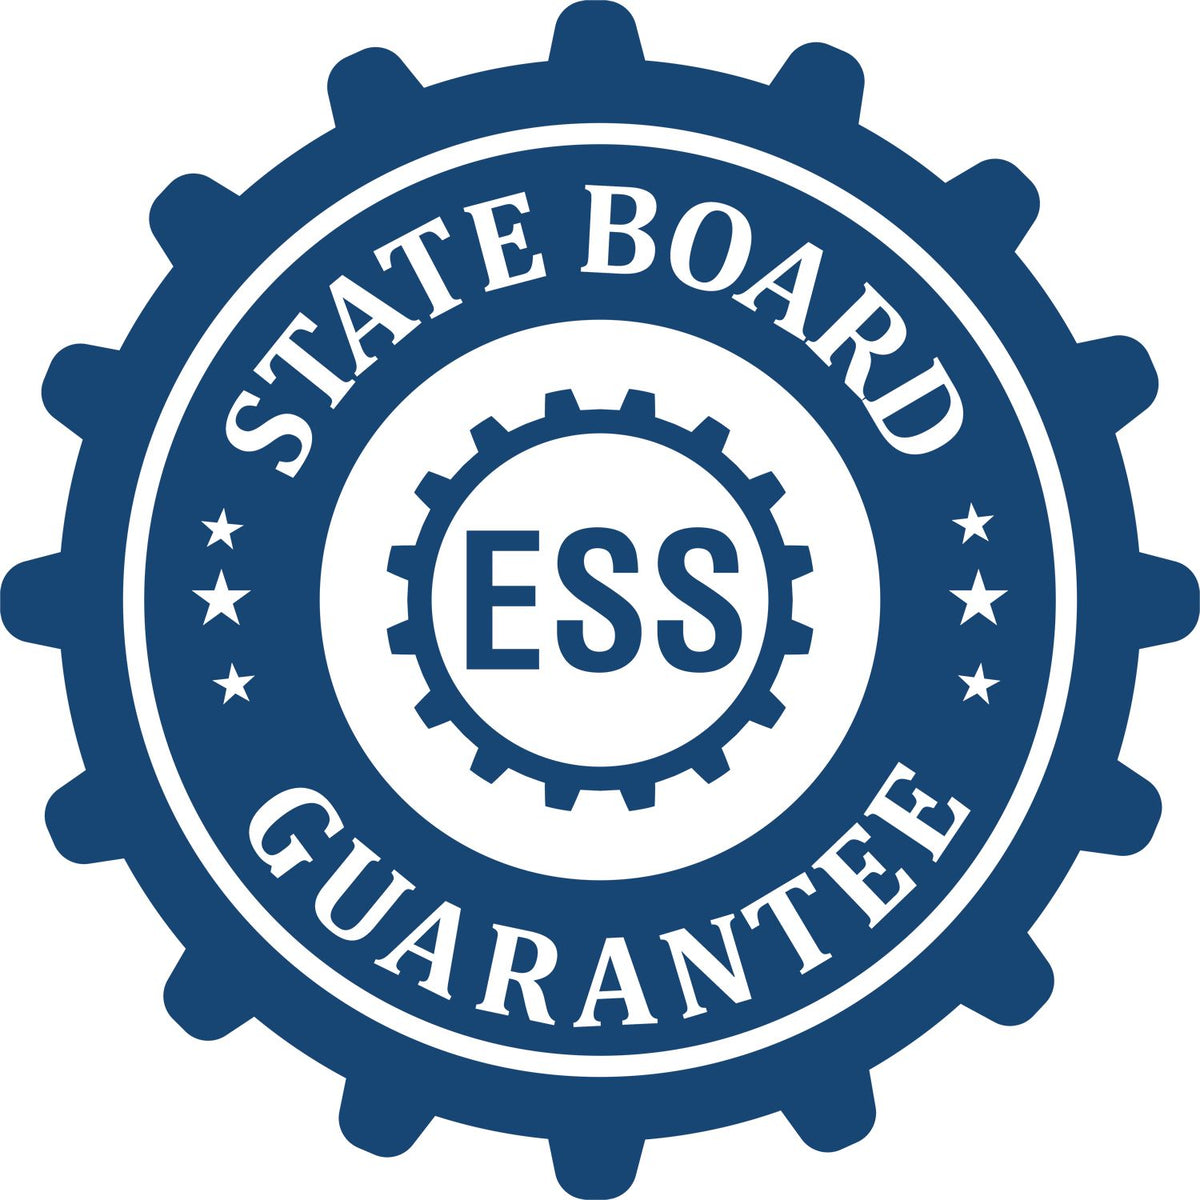 An emblem in a gear shape illustrating a state board guarantee for the Digital Iowa Geologist Stamp, Electronic Seal for Iowa Geologist